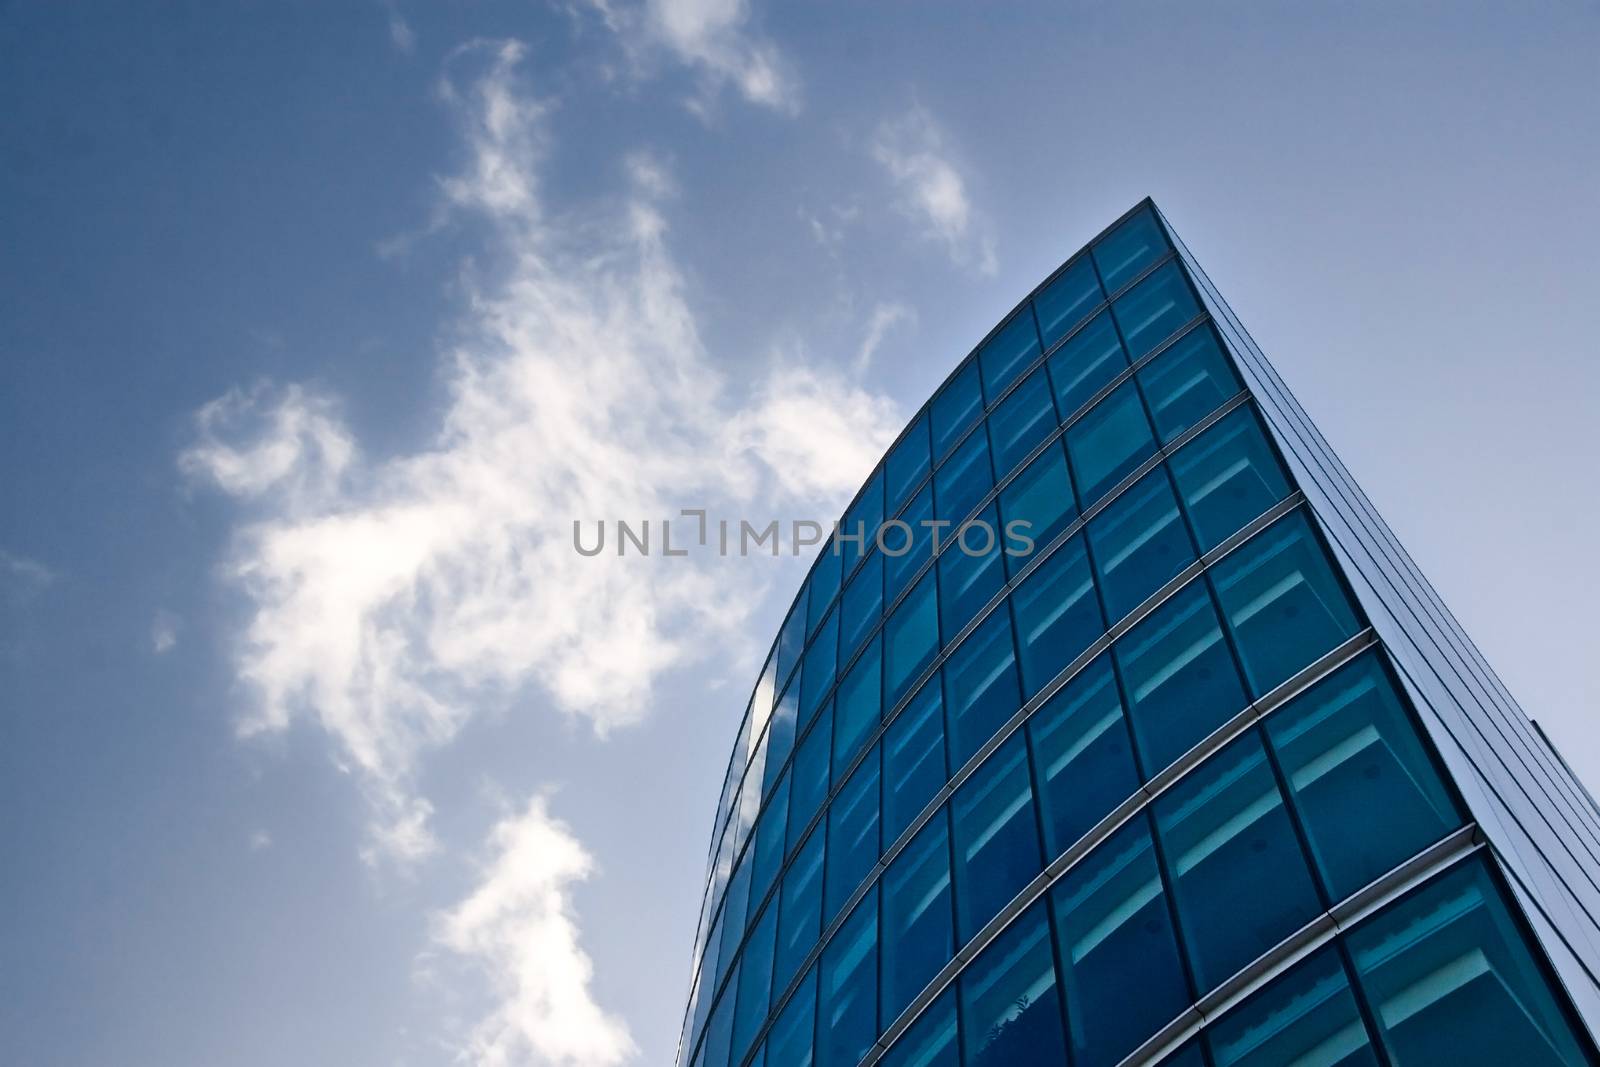 Part of modern glass and steel building forming lines against deep blue skies